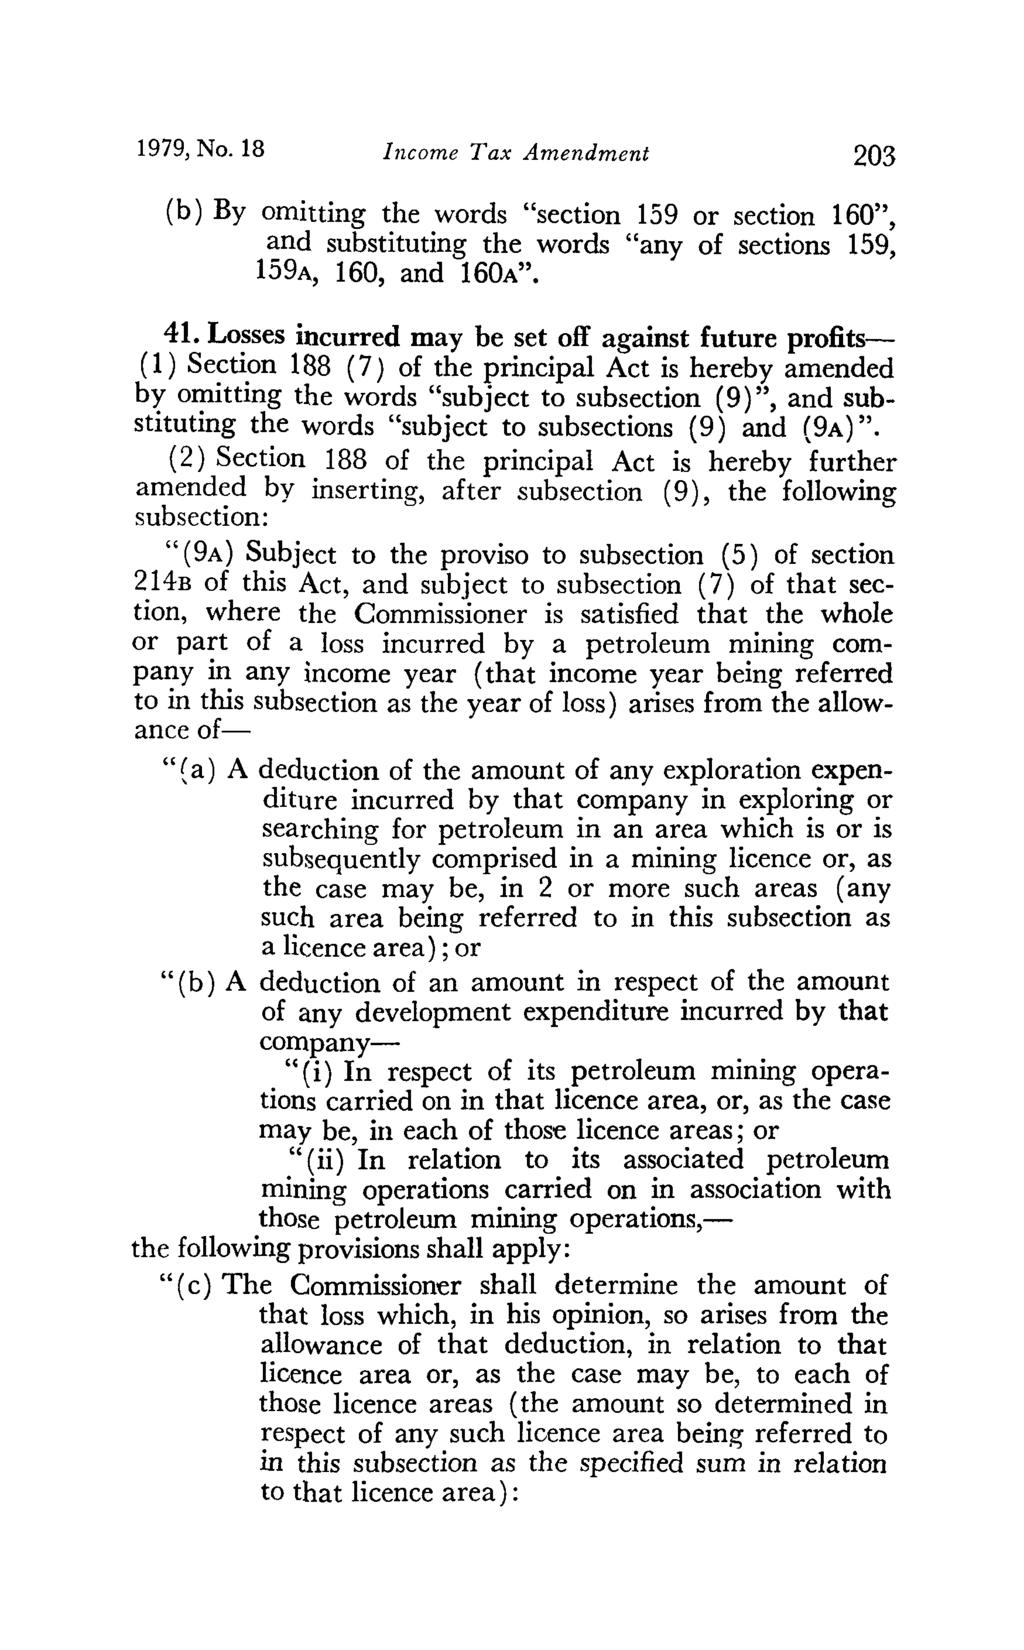 1979, No. 18 Income Tax Amendment 203 (b) By omitting the words "section 159 or section 160", and substituting the words "any of sections 159, 159A, 160, and 160A". 41.